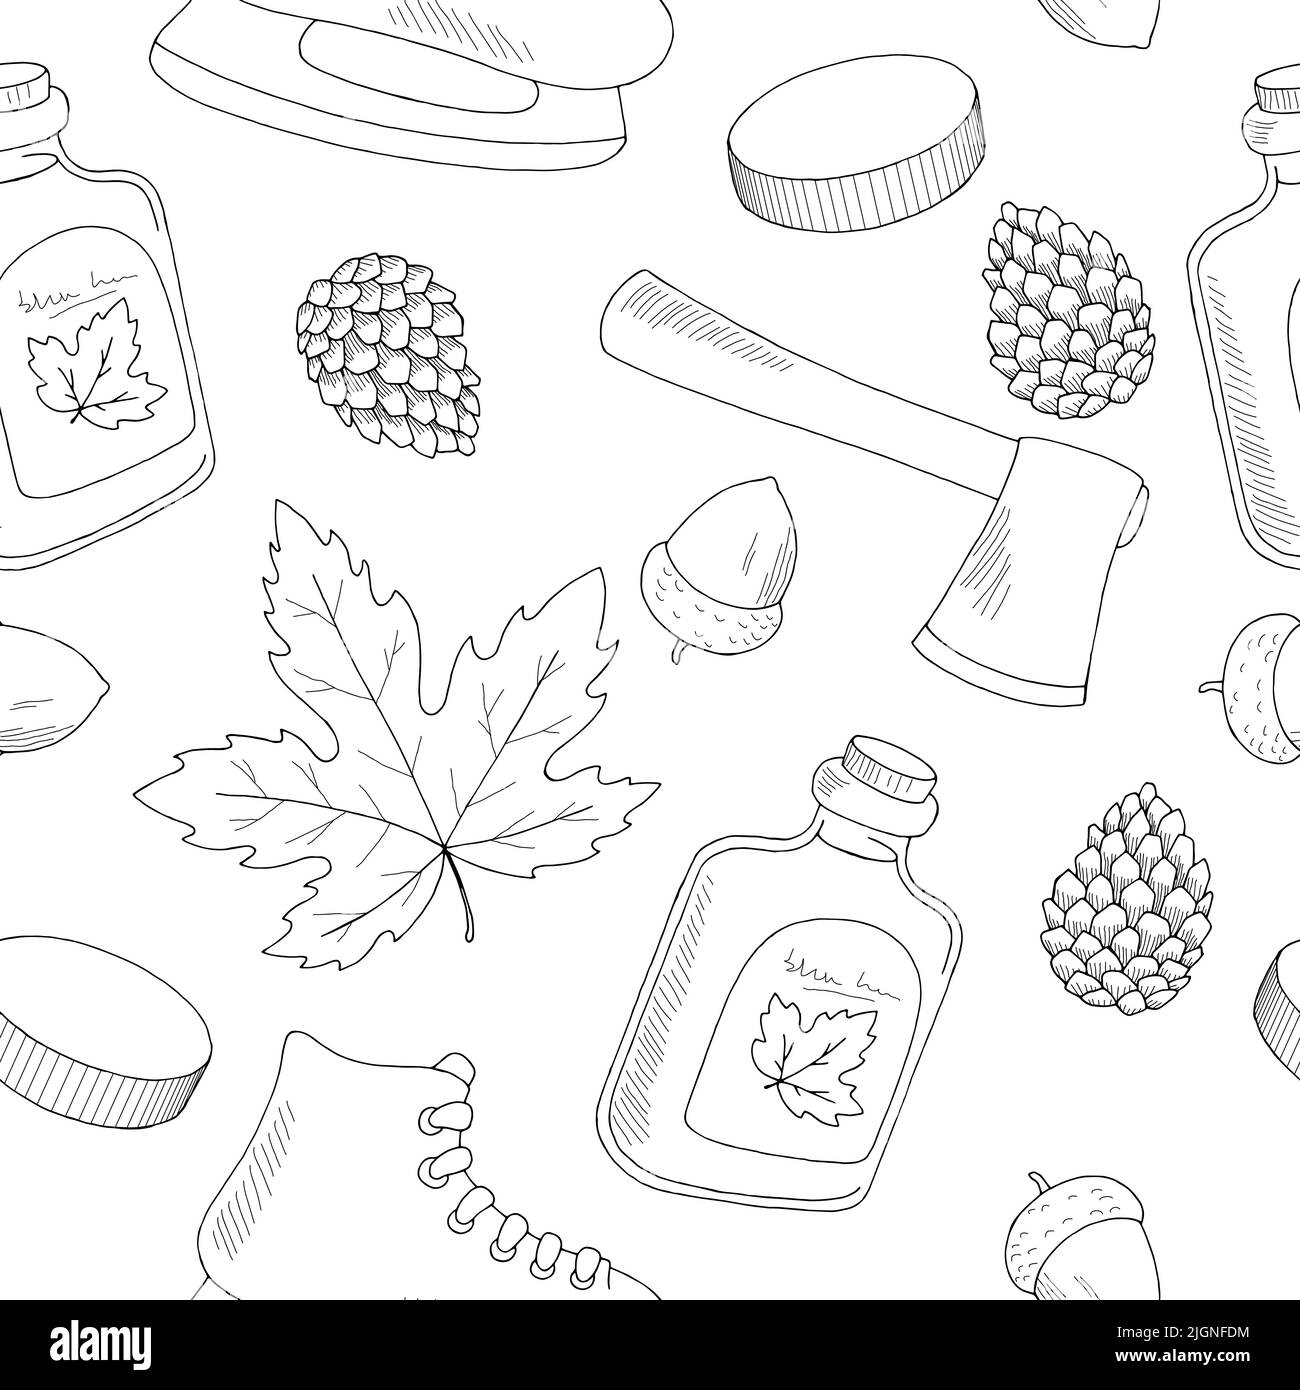 Canada seamless pattern background black white sketch illustration vector Stock Vector